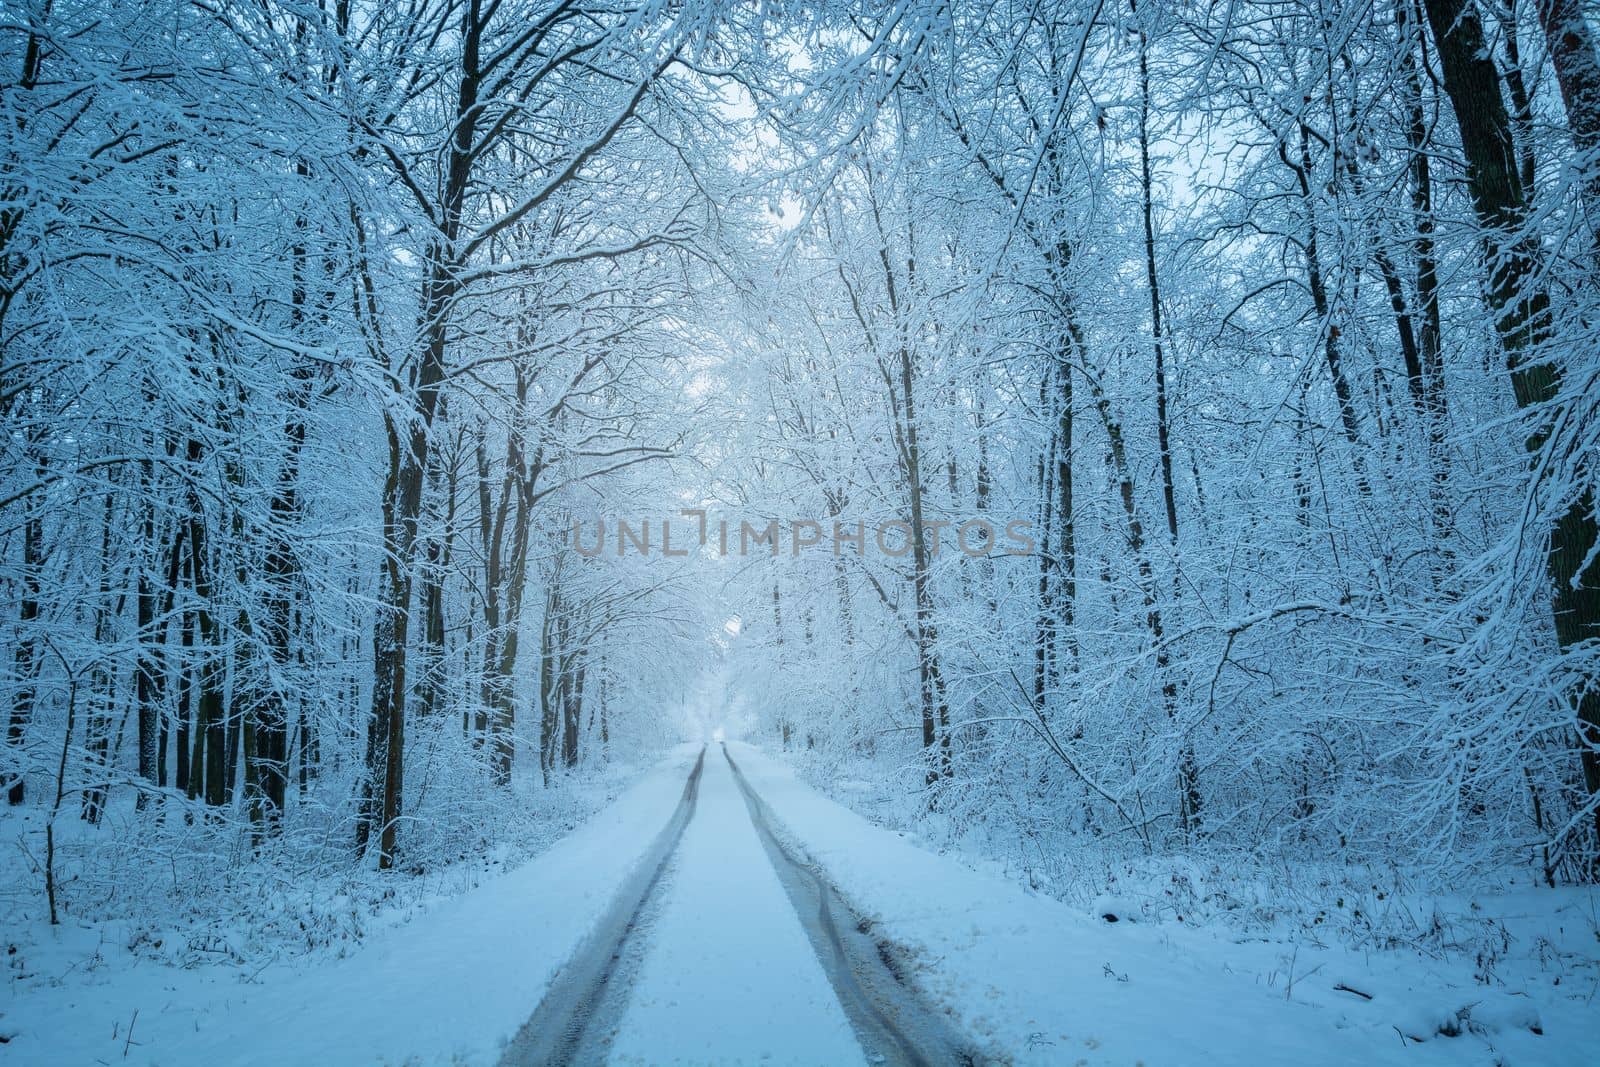 A buried straight road in a winter snowy forest, eastern Poland